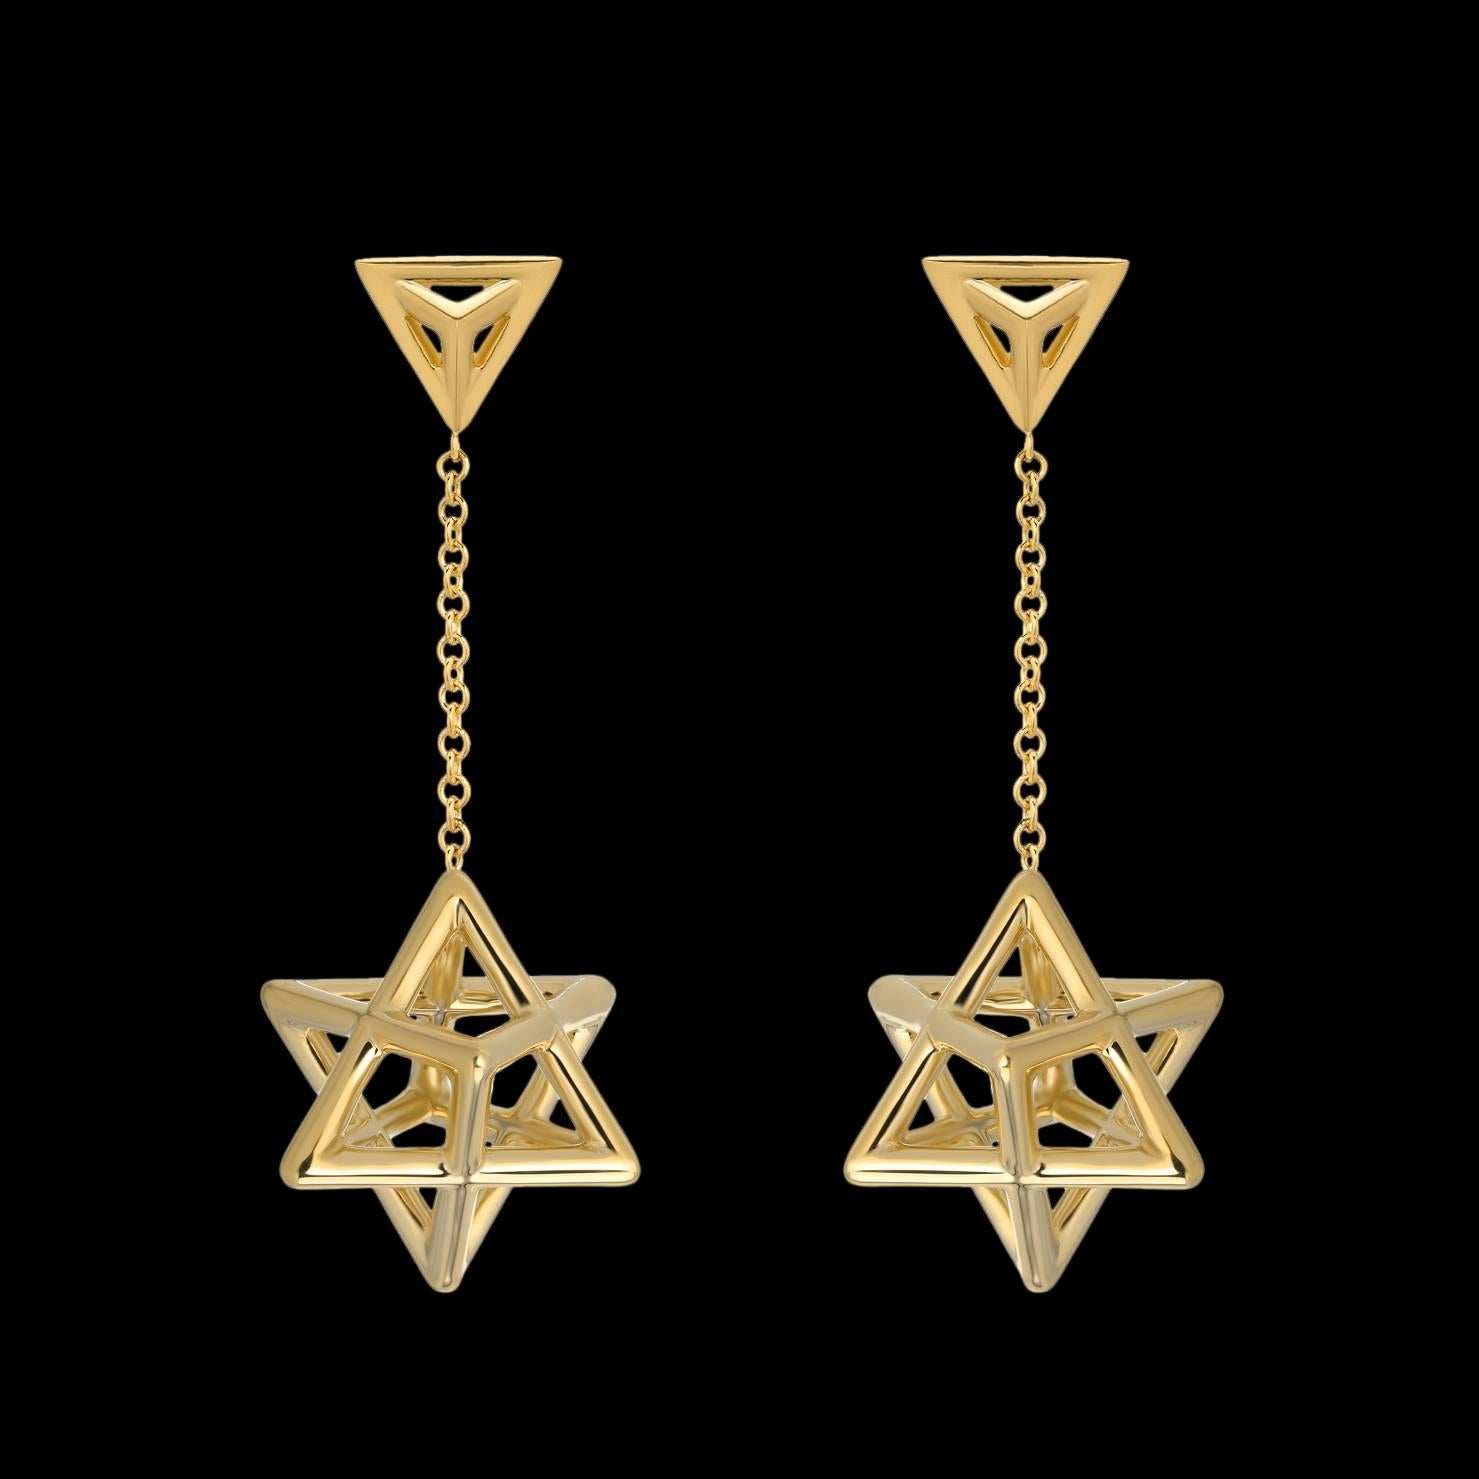 Merkaba 18K yellow gold drop earrings, tethered by a triangle stud, feature a chain suspending a three dimensional Merkaba Star of David, measuring 0.57 inches. Secure La Pousette ear backs mirror the triangle motif. 
Total length -1.5 inches.
Each